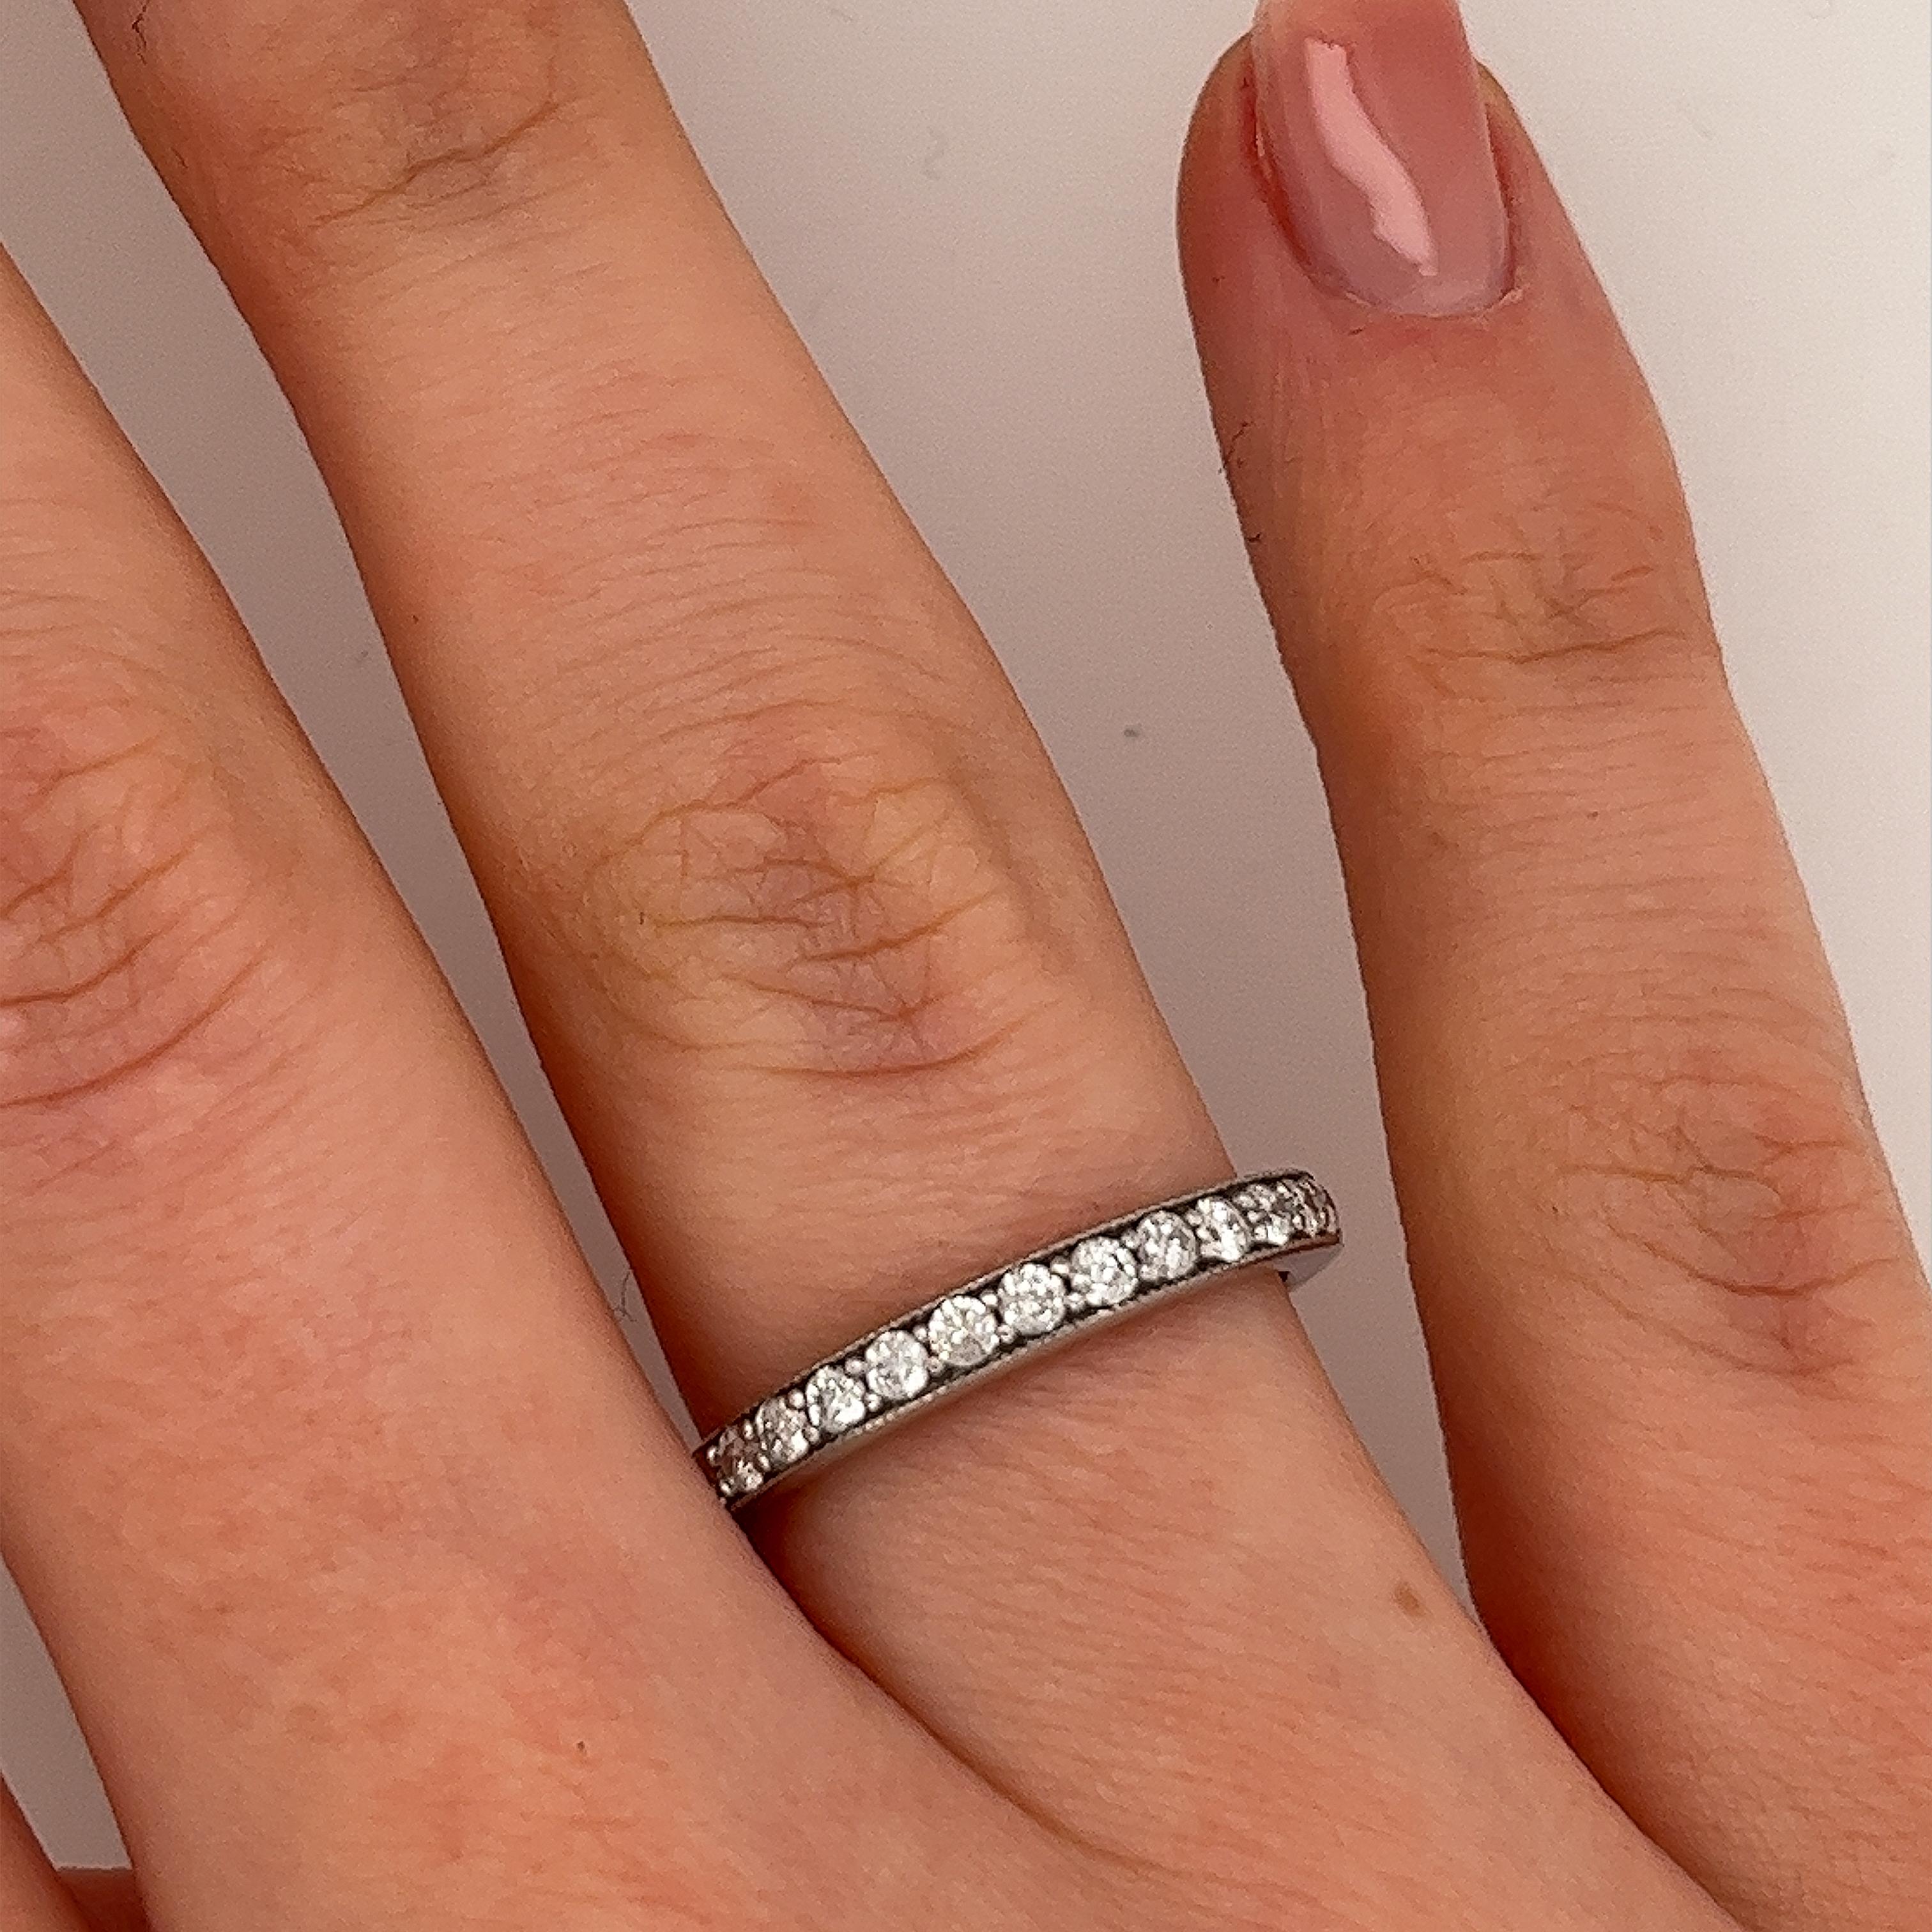 This 18ct white gold diamond half-eternity band is set with natural diamonds, with a total diamond weight of 0.36ct. This ring is elegant and beautiful.
Total Diamond Weight: 0.36ct 
Diamond Colour: H
Diamond Clarity: SI1
Width of Band: 2mm 
Width